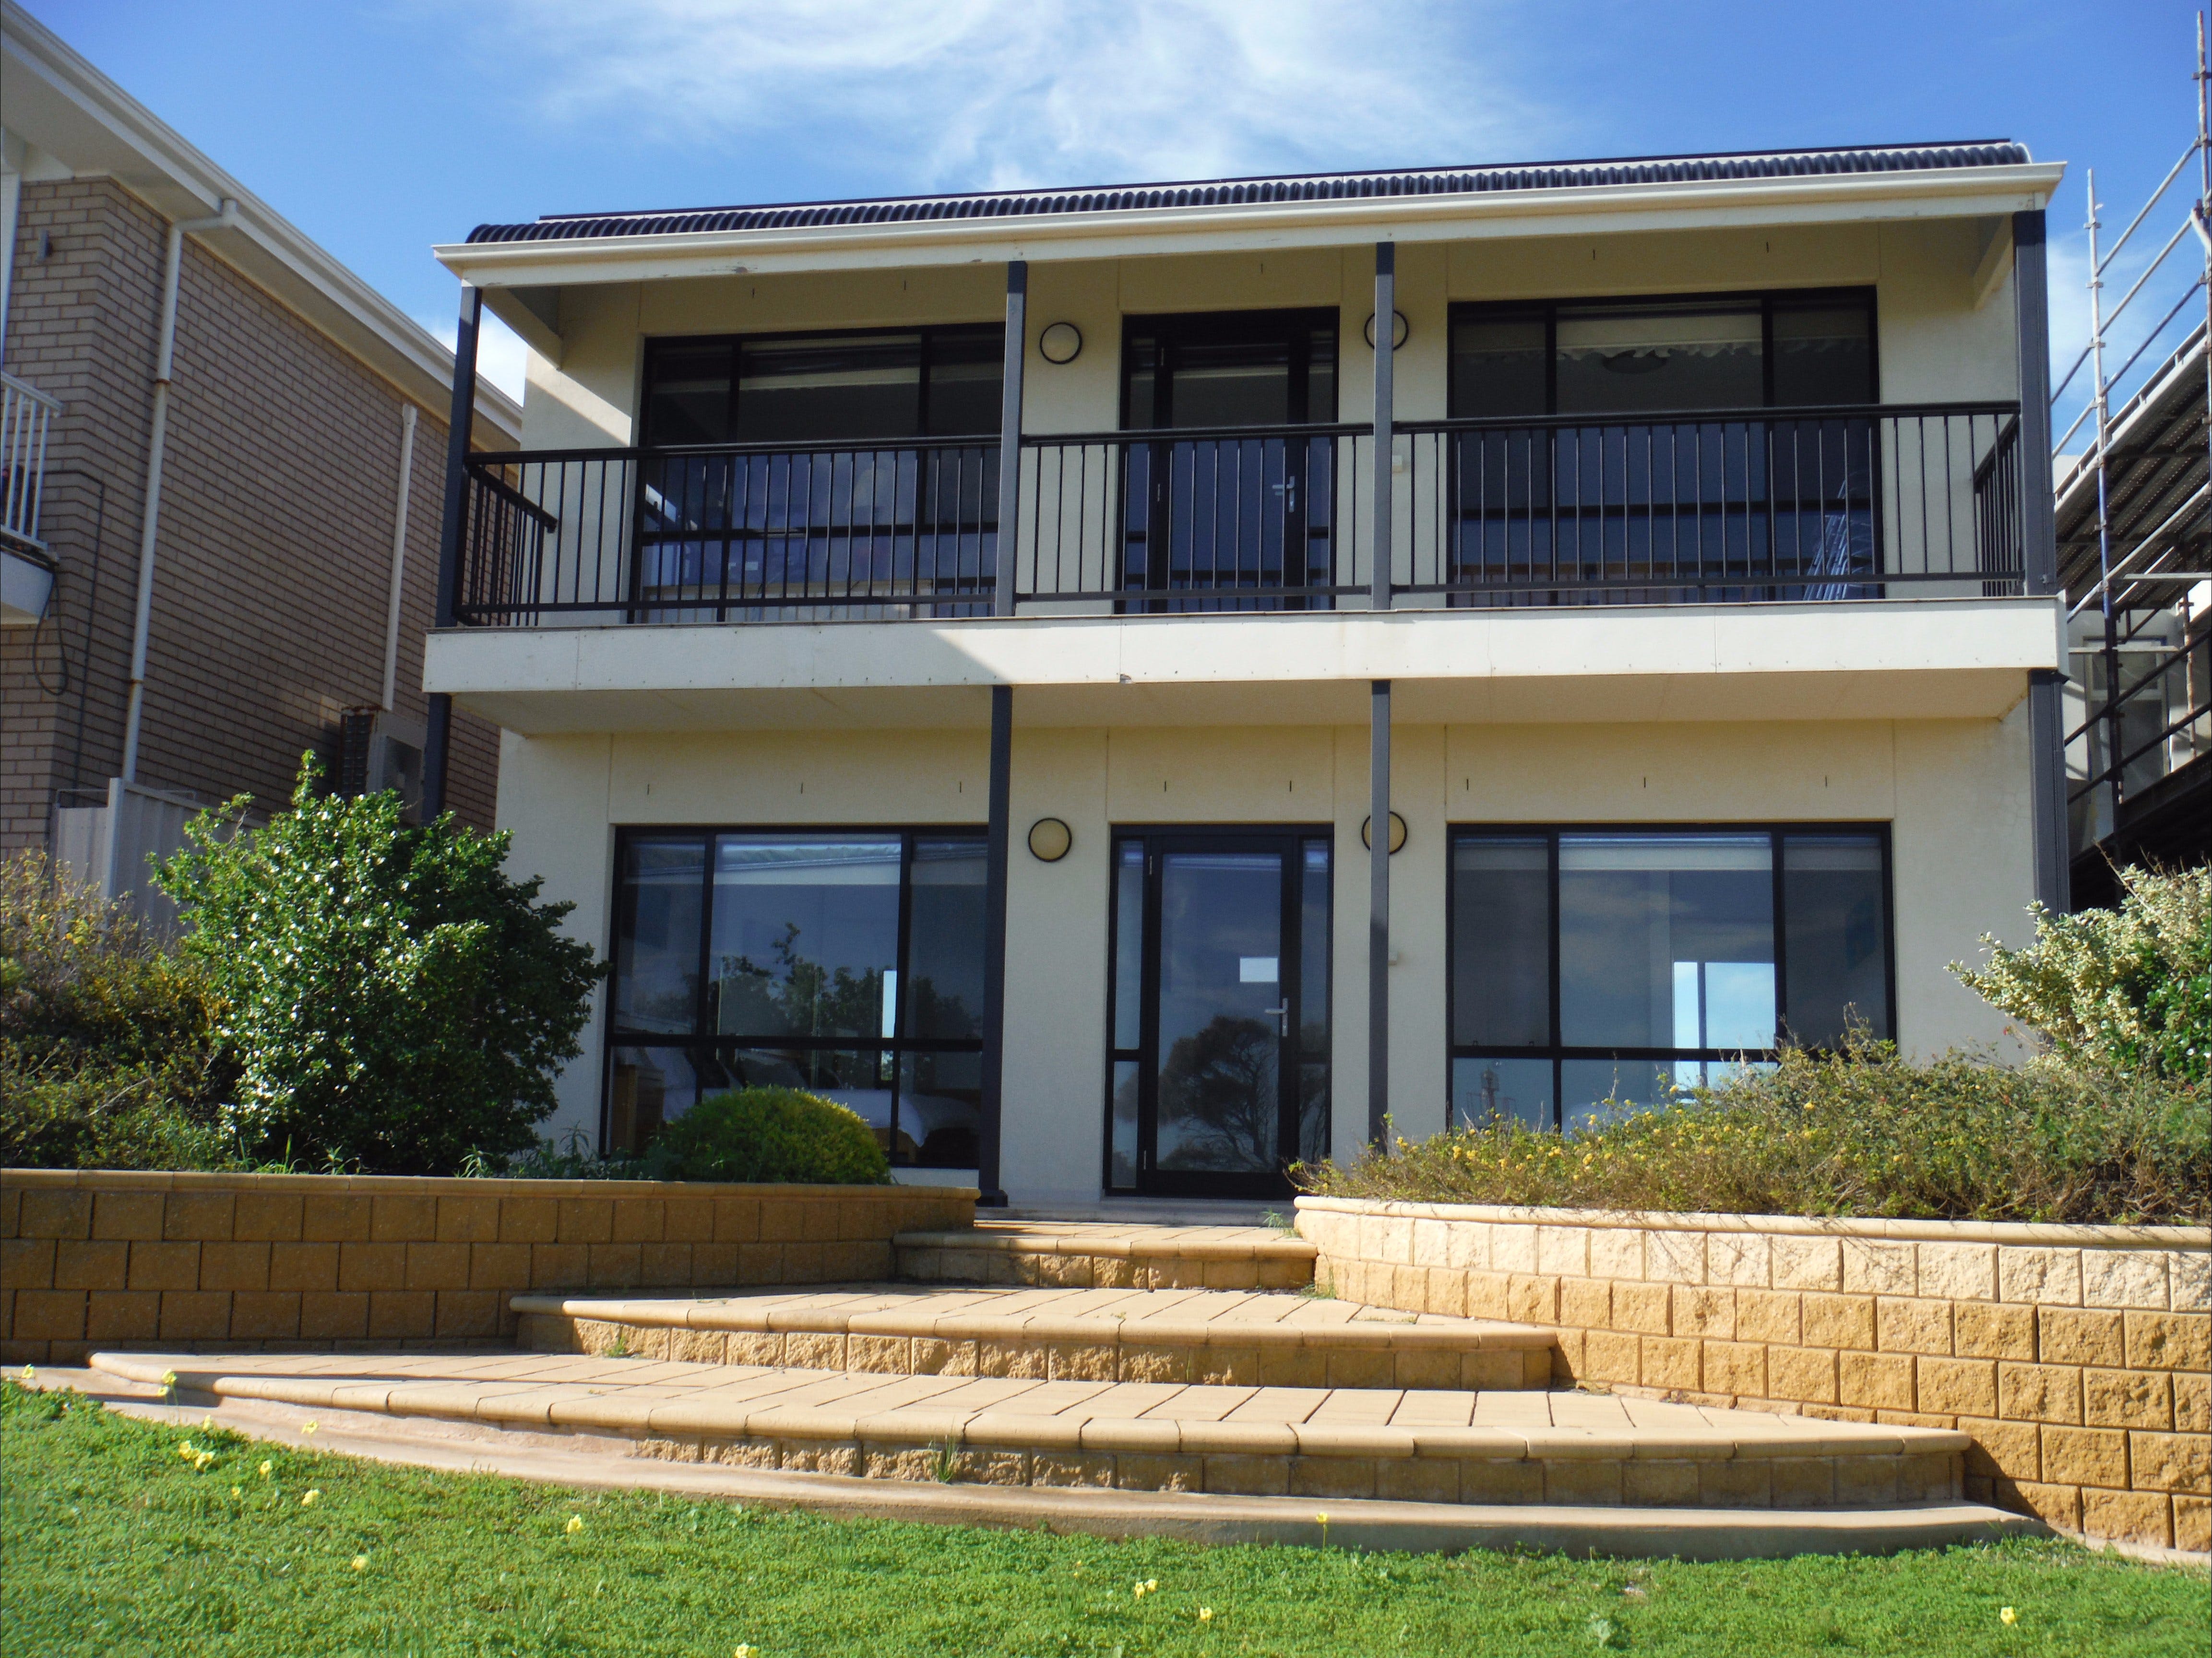 South Shores - Coogee Beach Accommodation